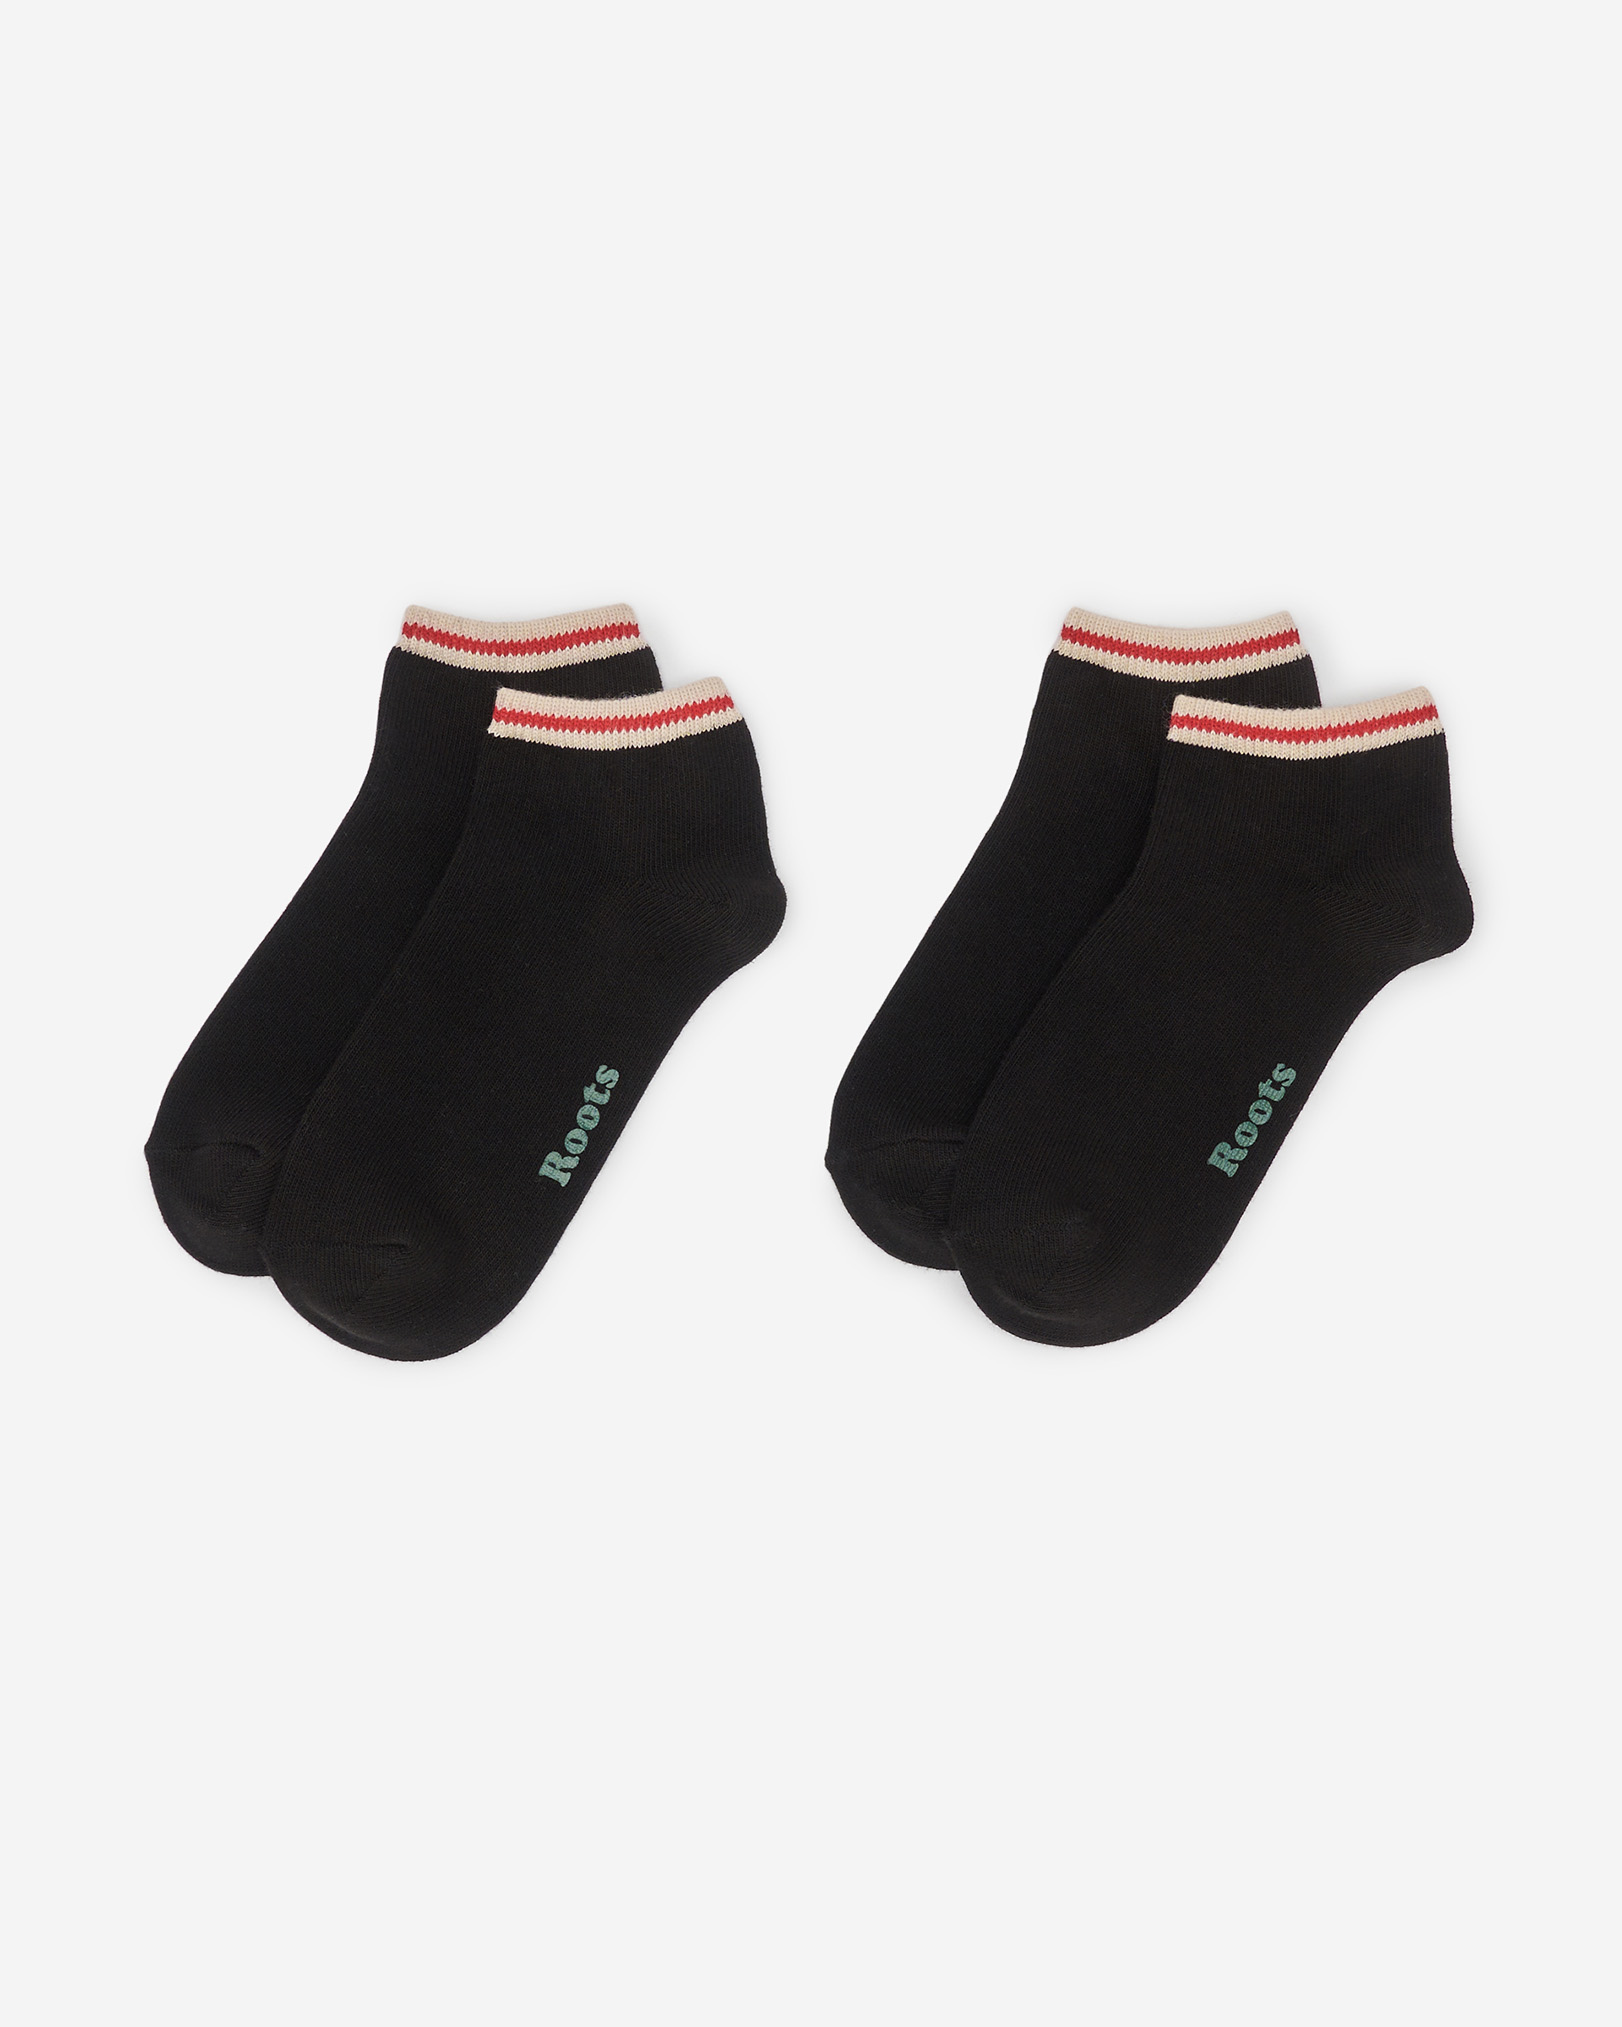 Roots Adult Cotton Cabin Ped Sock 2 Pack in